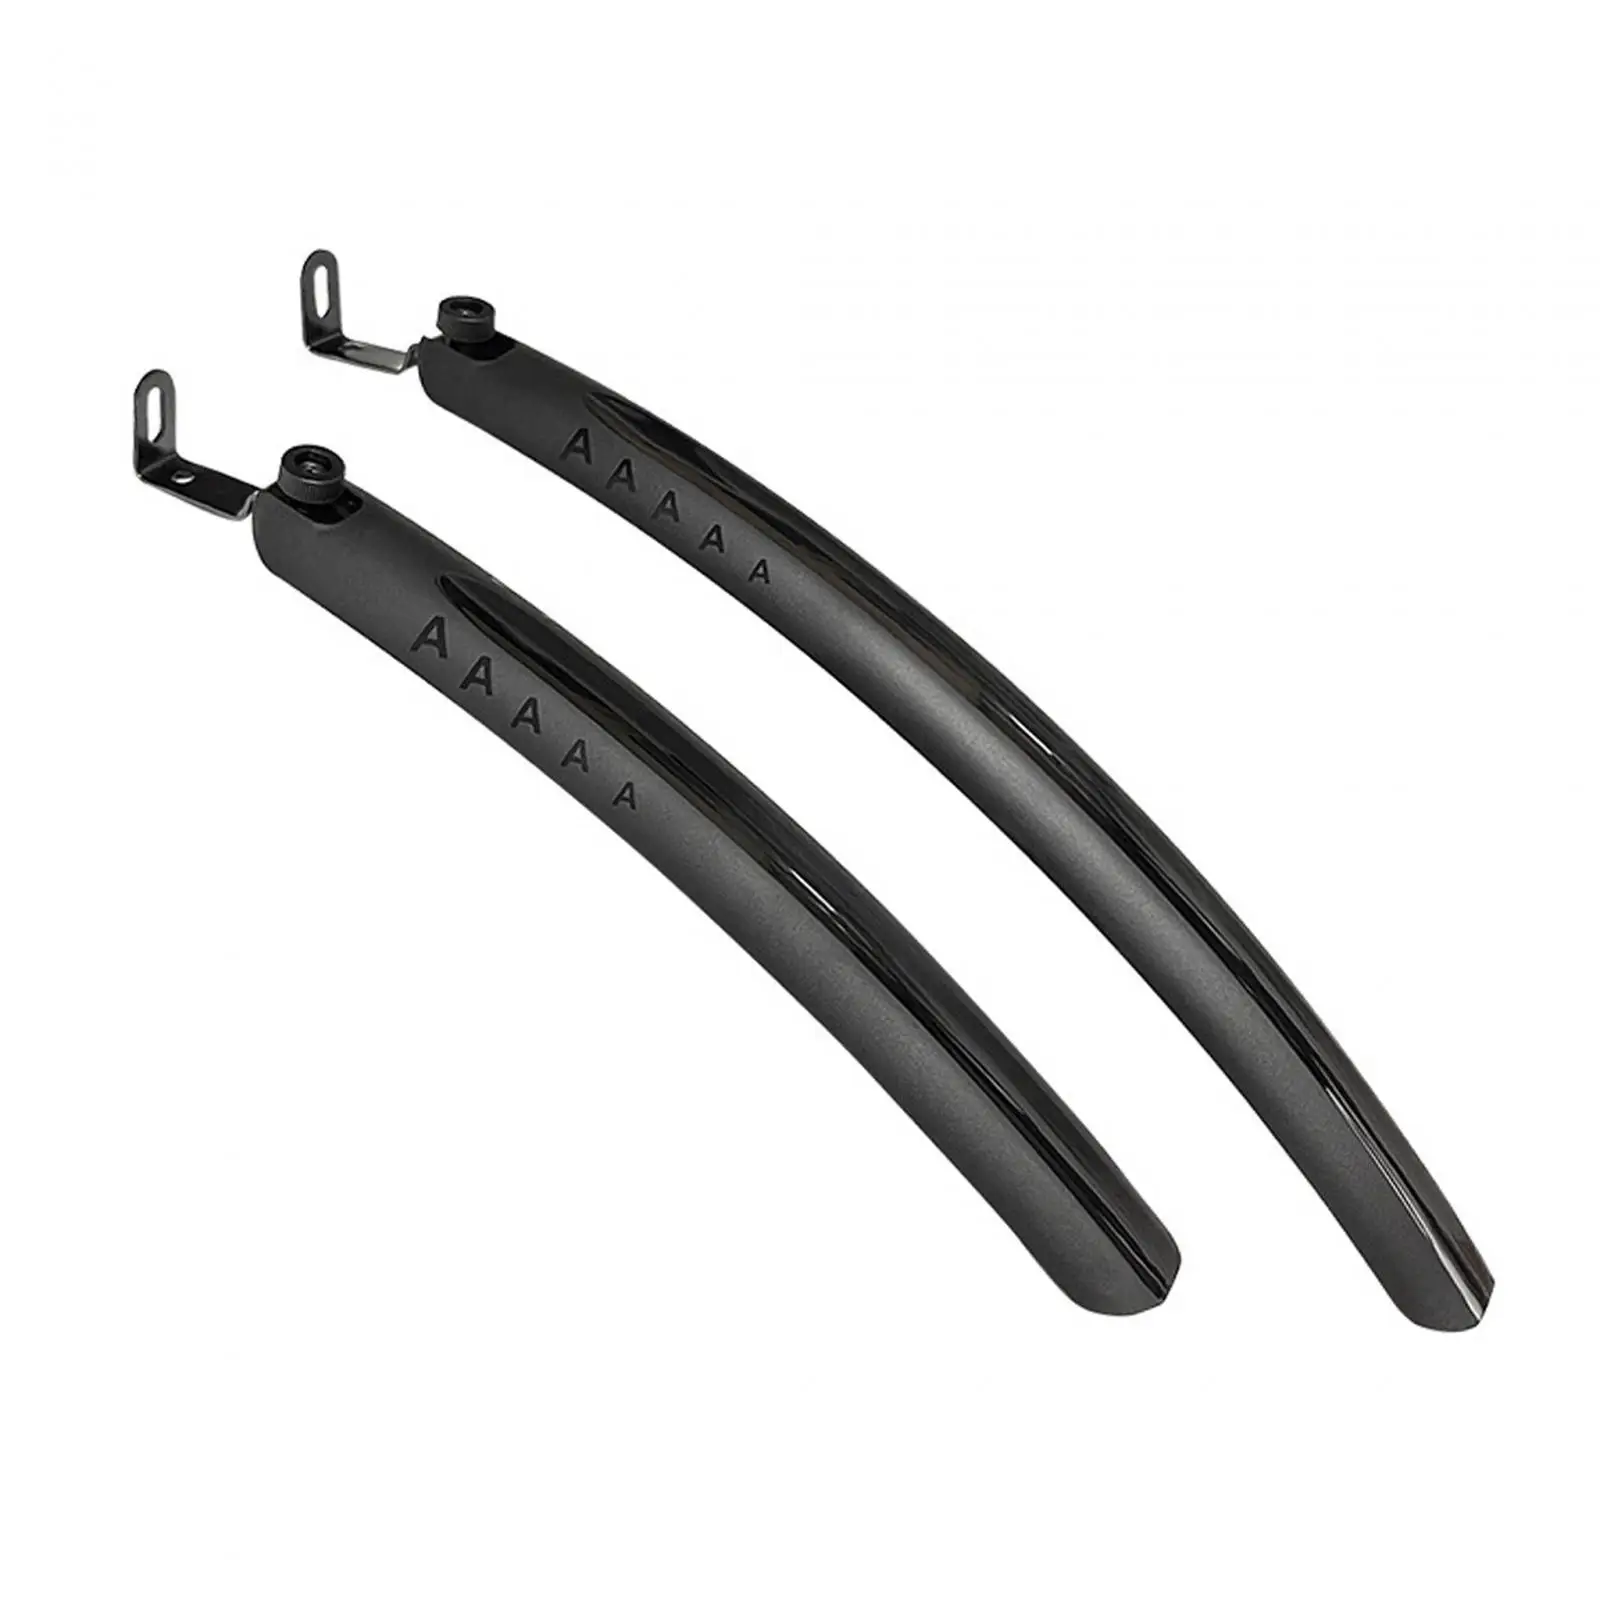 Bike Fenders Front and Rear Mud Guard Mudguards for 26 28inch Folding Bike